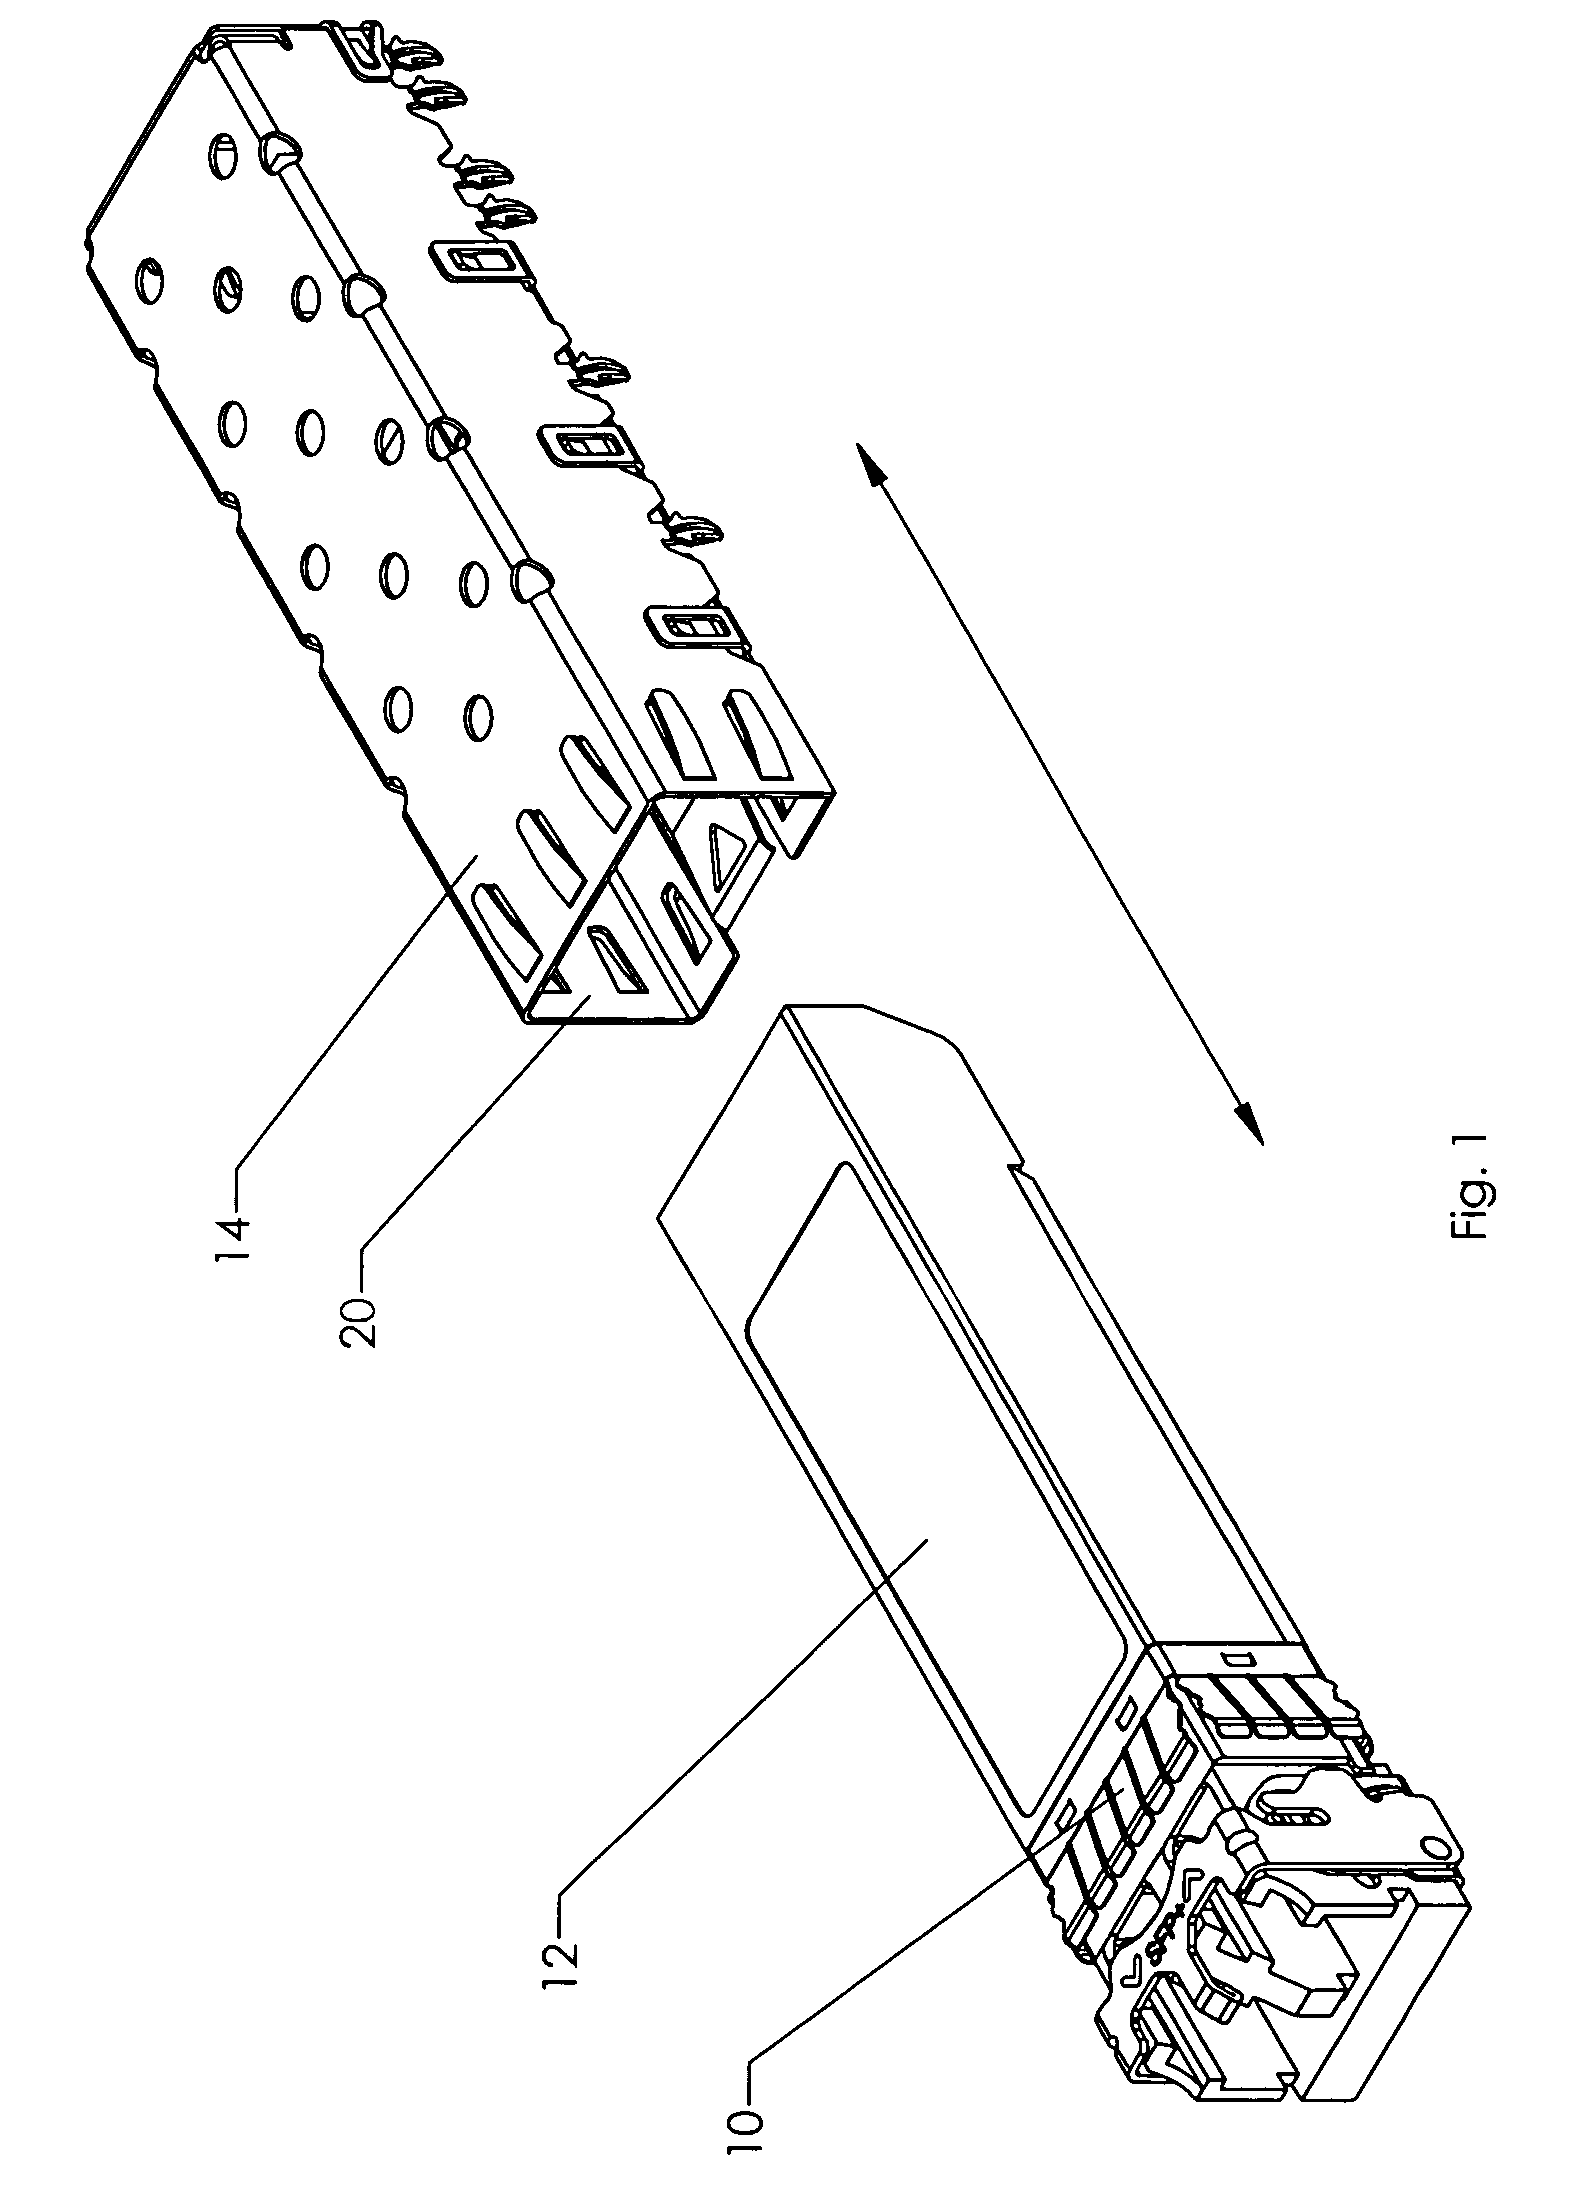 Transceiver module with collapsible fingers that form a sealed EMI shield